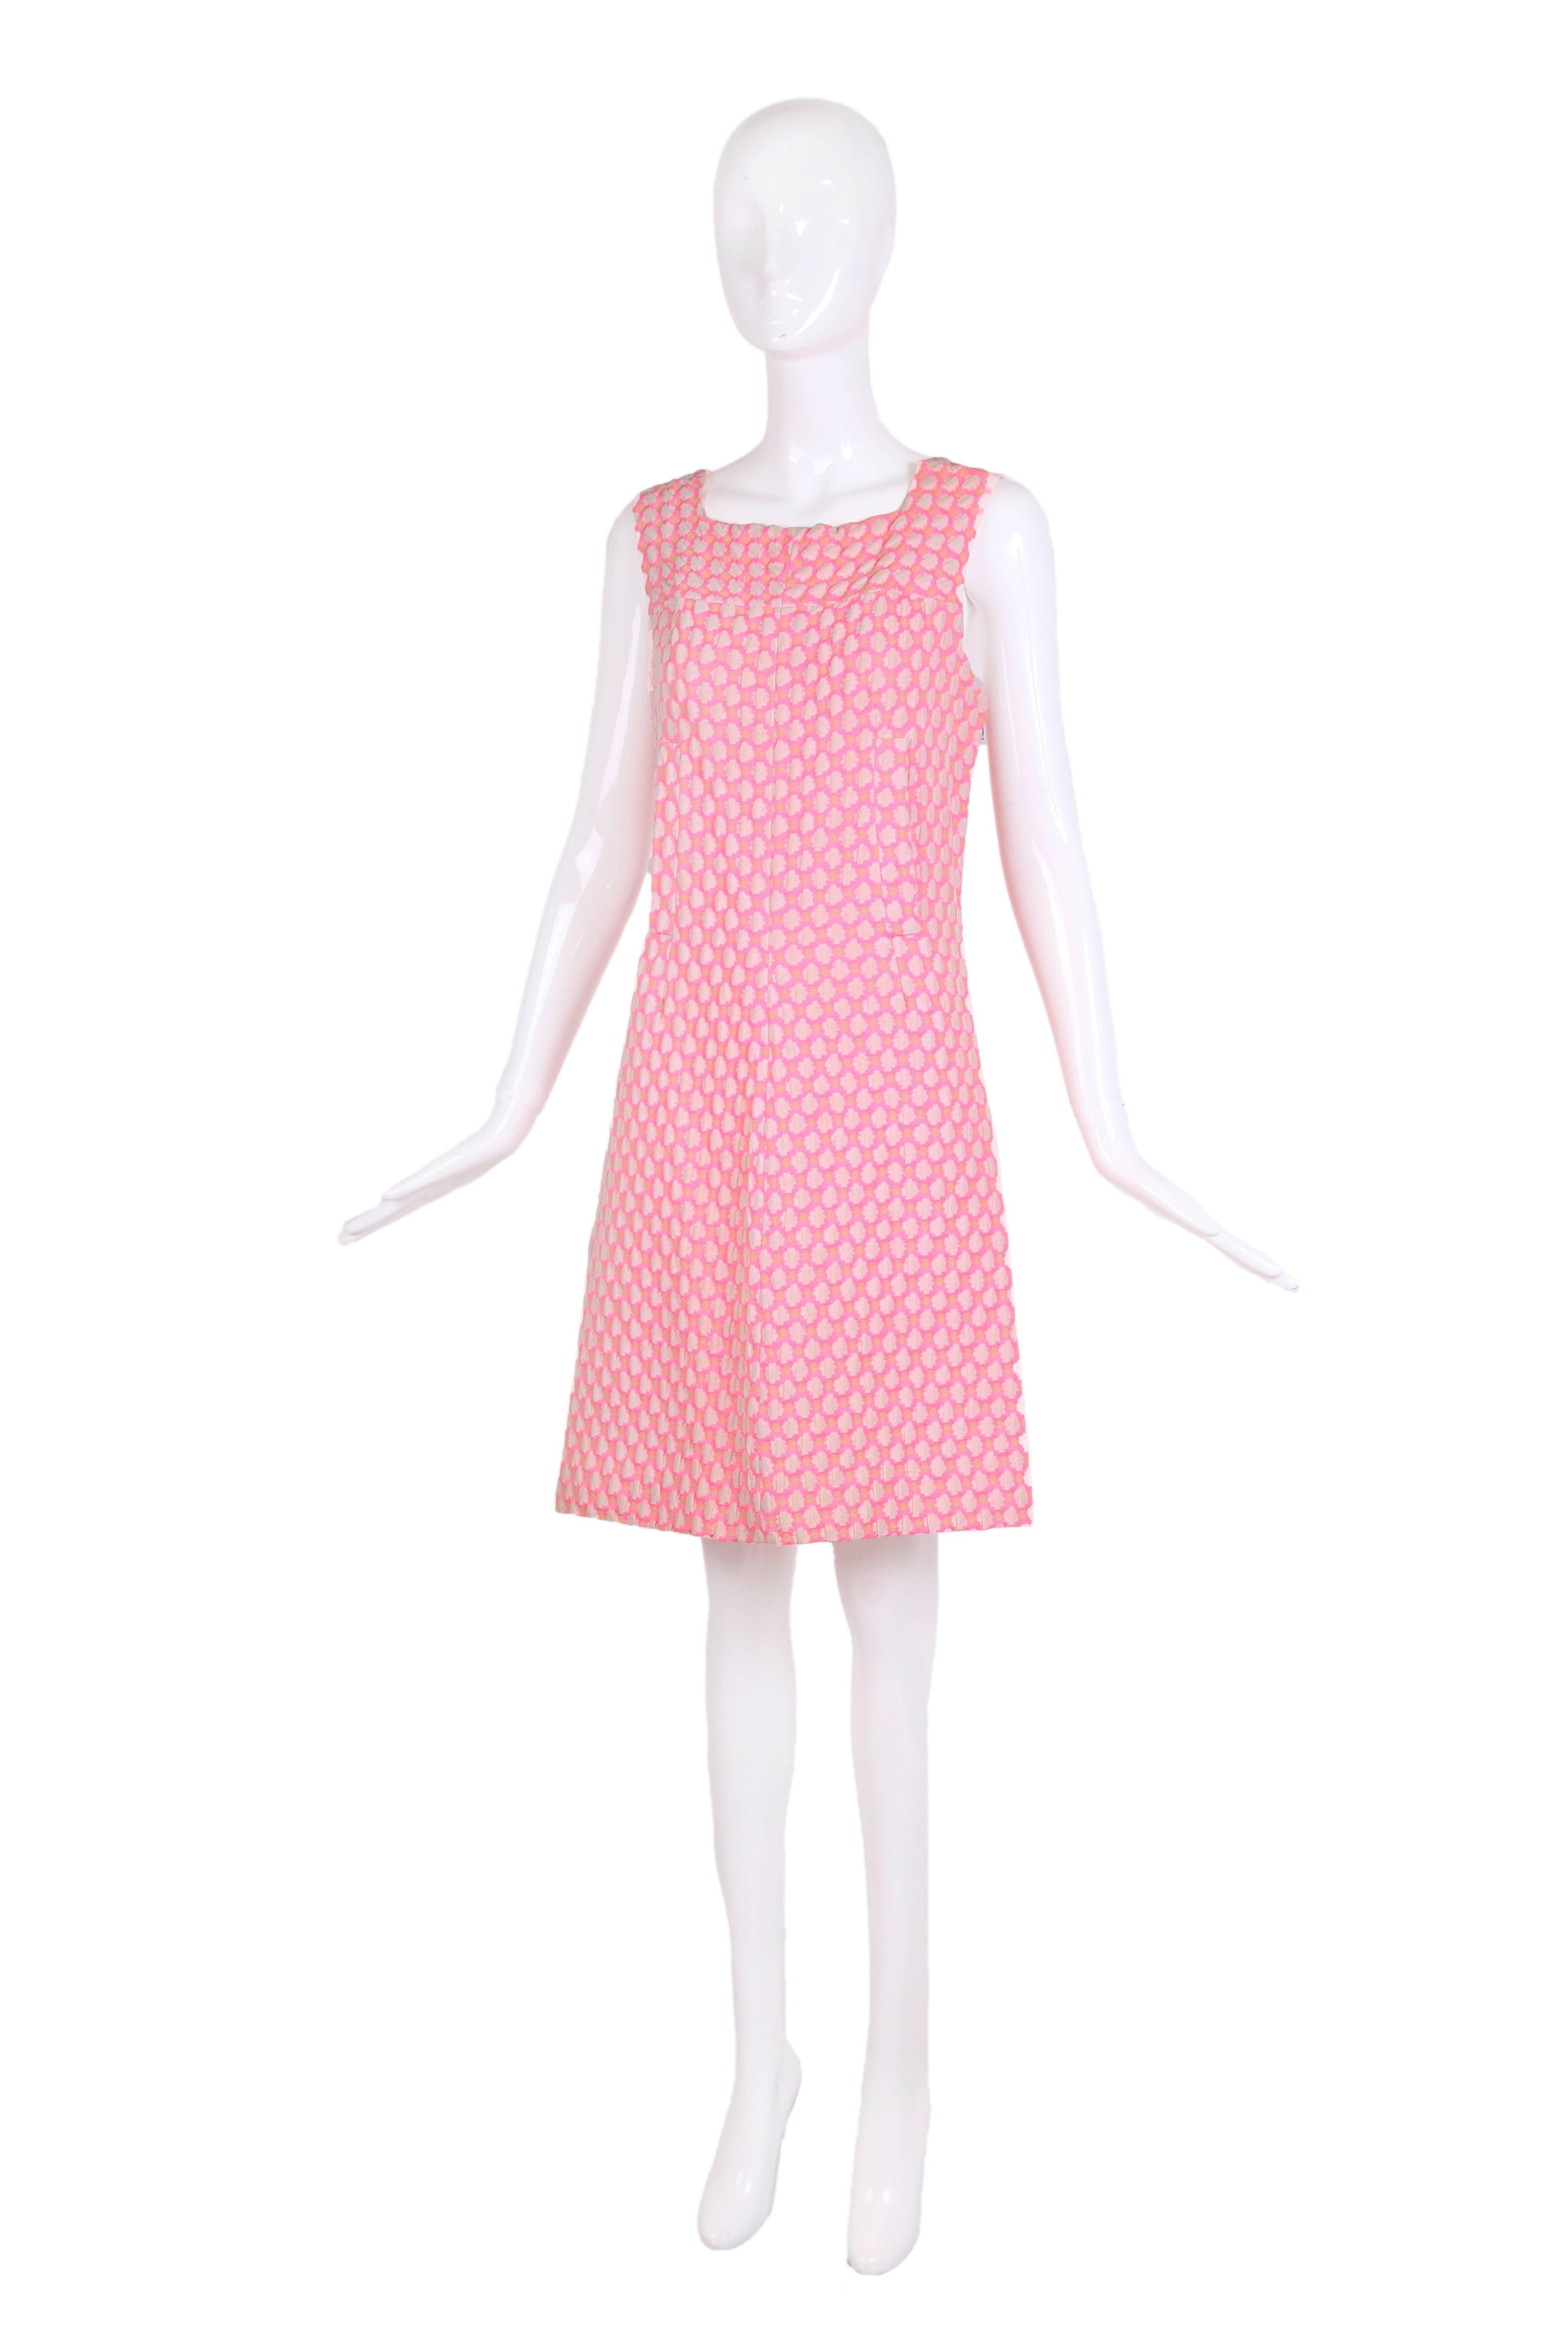 1960's Guy Laroche shift dress that was designed by Laroche but sewn and finished by French couturier Maria Carine. There is no fabric tag but the fabric appears to be a puckered cotton blend (the fabric has some stretch) and is patterned with